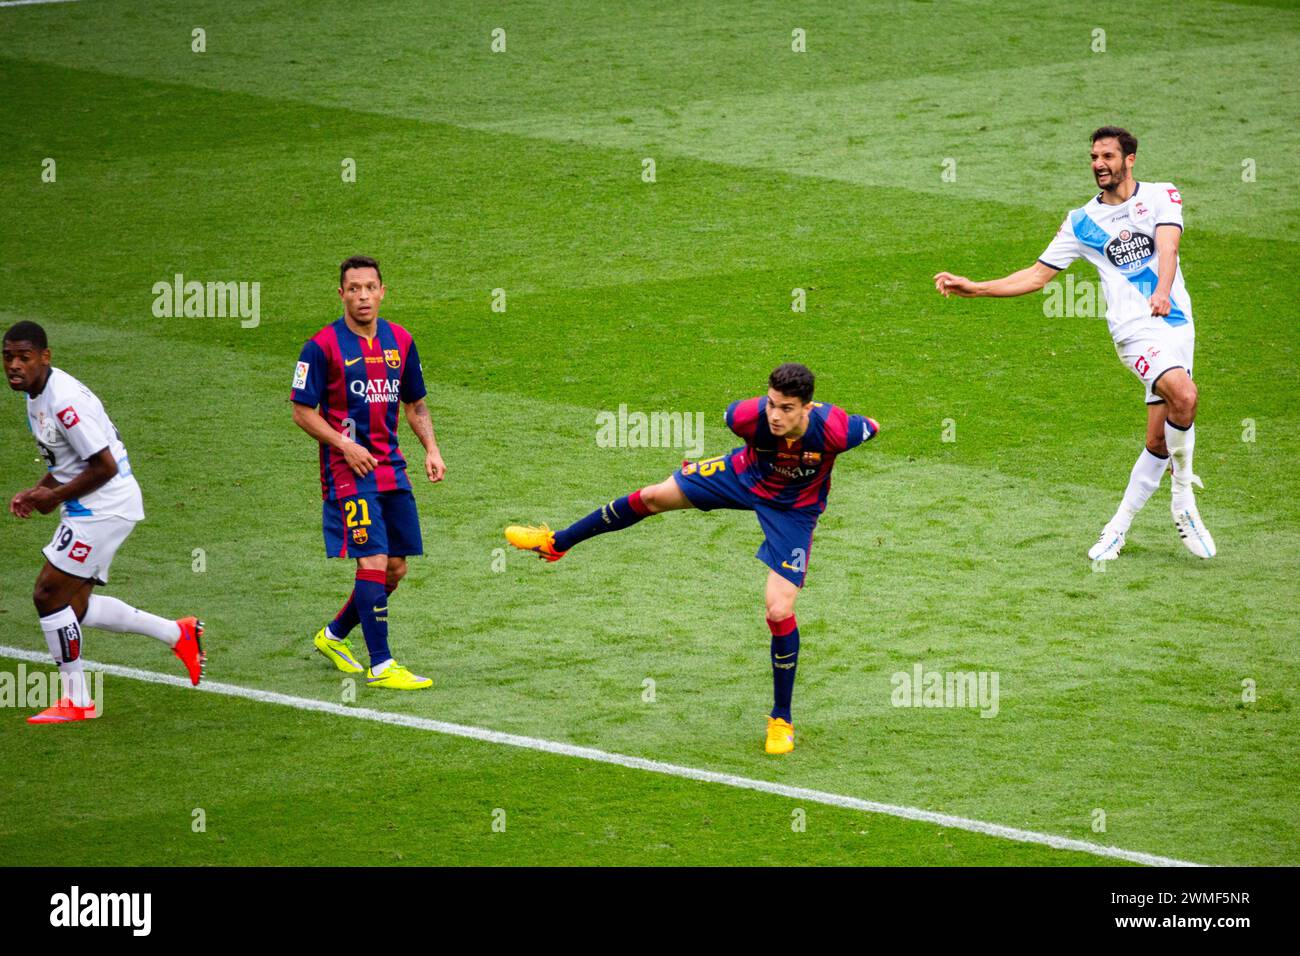 CELSO BORGES, DEPORTIVO DE CORUNA, 2015: Celso Borges of Deportivo shoots from the edge of the box. The final game of the La Liga 2014-15 season in Spain between Barcelona FC and Deportivo de La Coruna at Camp Nou, Barcelona on May 23 2015. The Game finished 2-2. Barcelona celebrated winning the championship title and legend Xavi's final home game. Deportivo got the point they needed to avoid relegation. Photograph: Rob Watkins Stock Photo